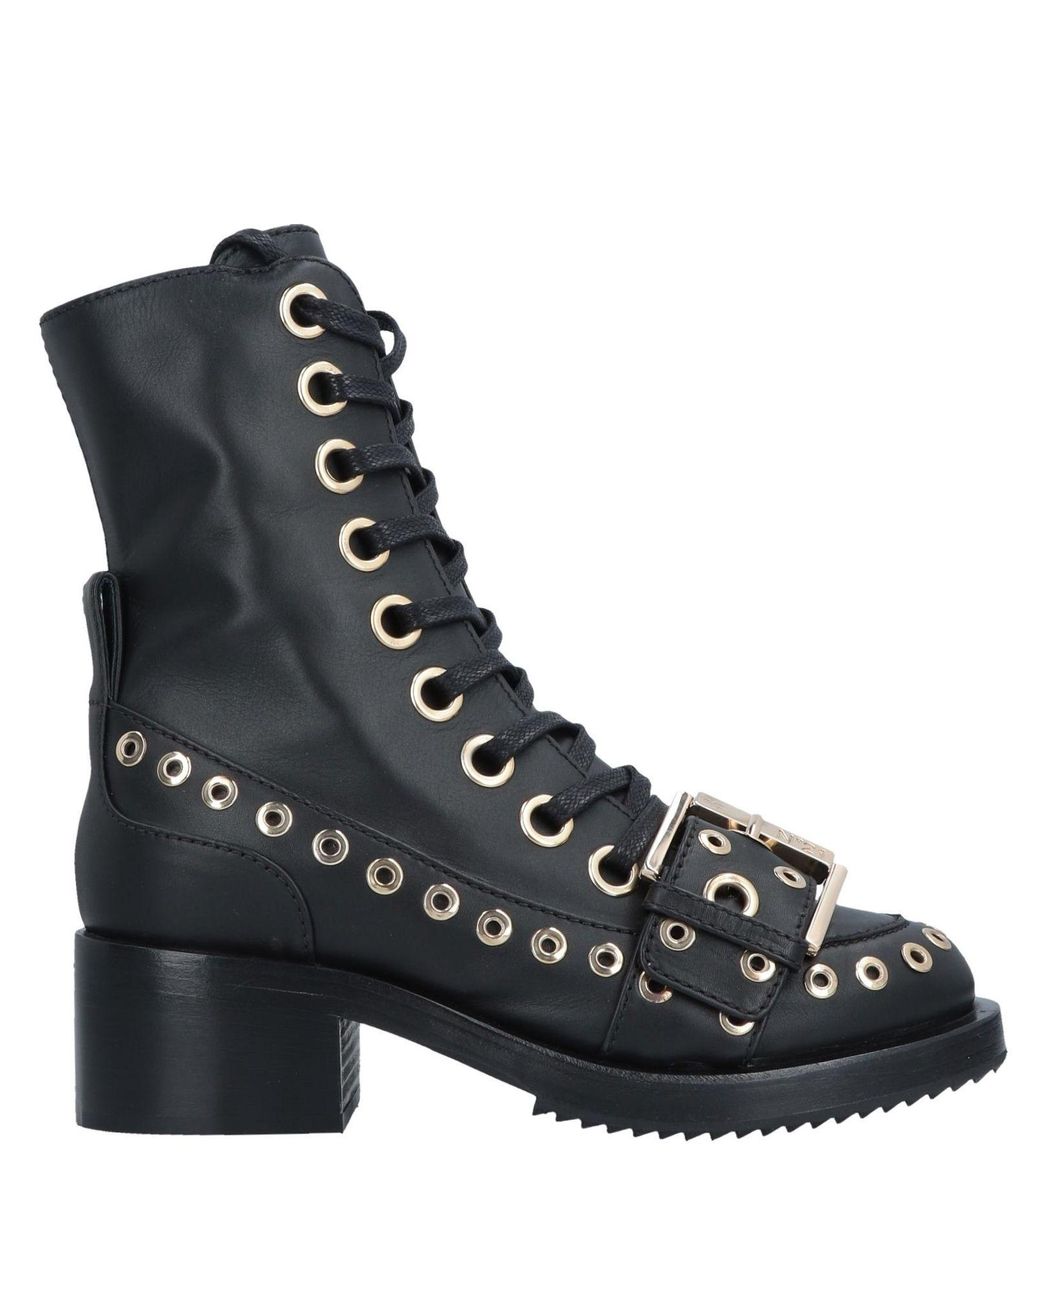 N°21 Leather Ankle Boots in Black - Lyst